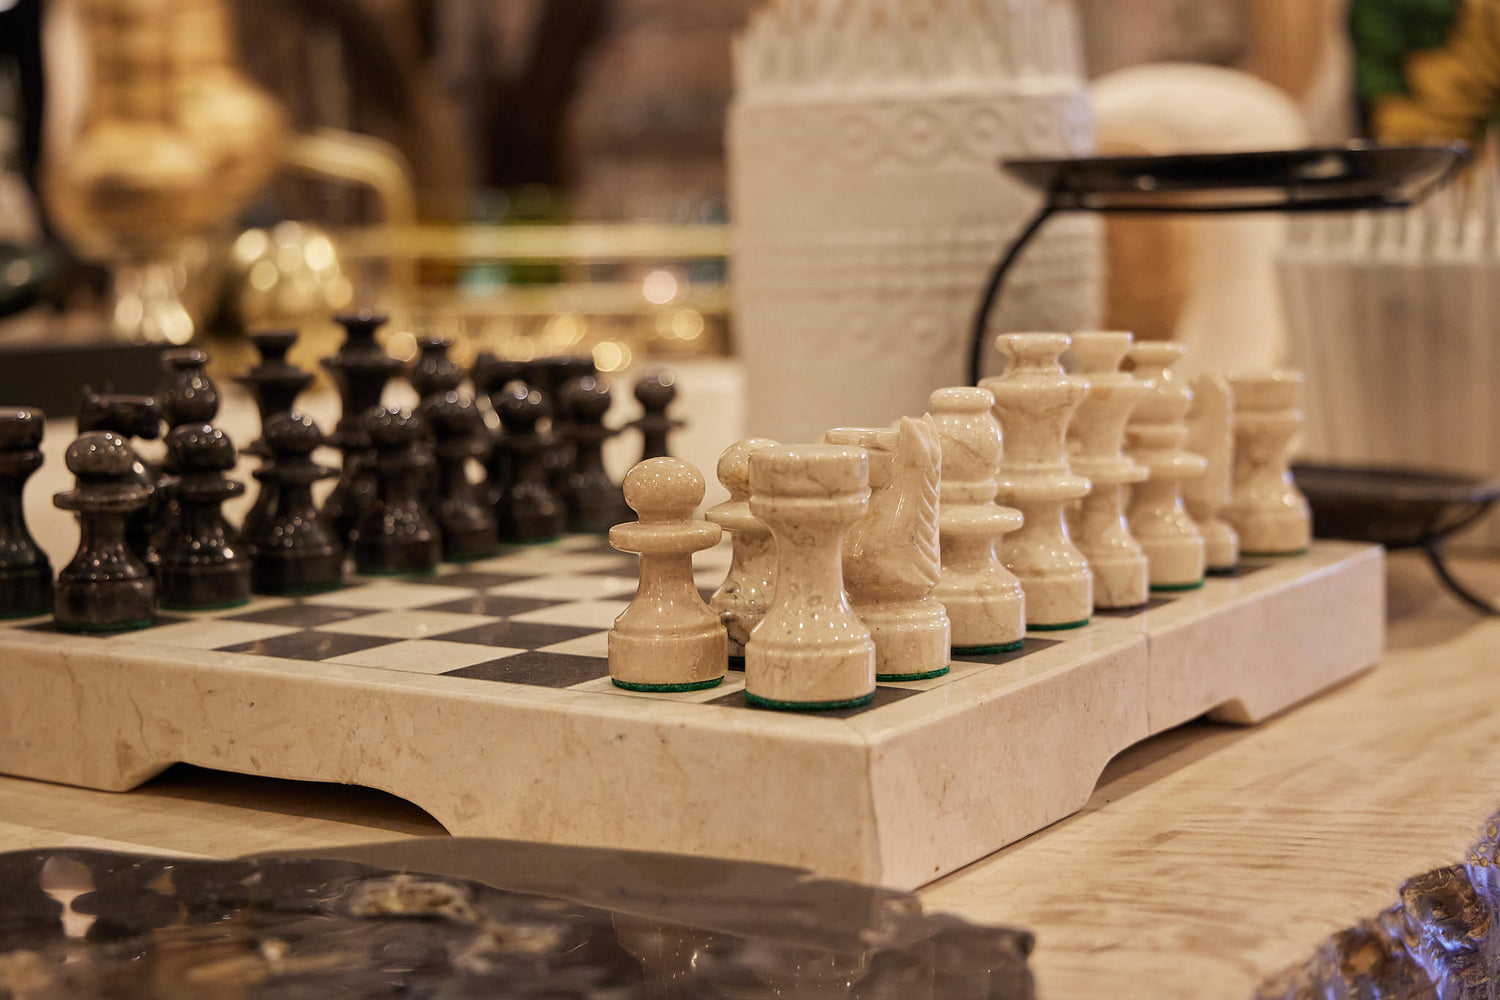 CHESS SET MARBLE